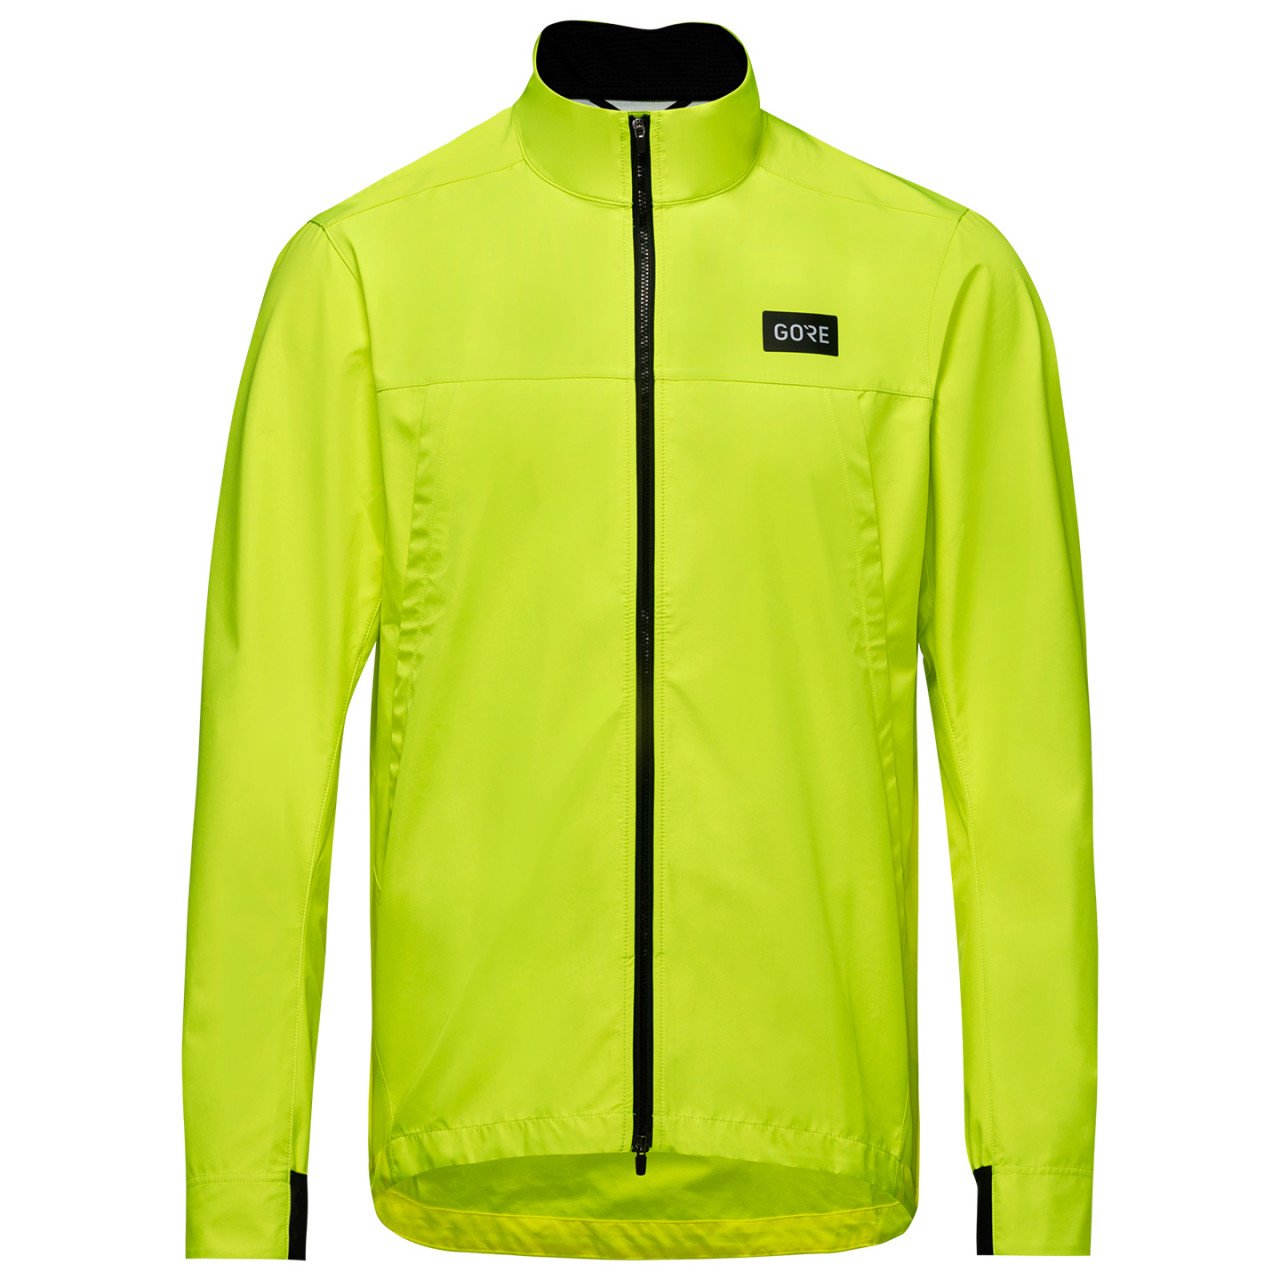 Everyday cycling jacket